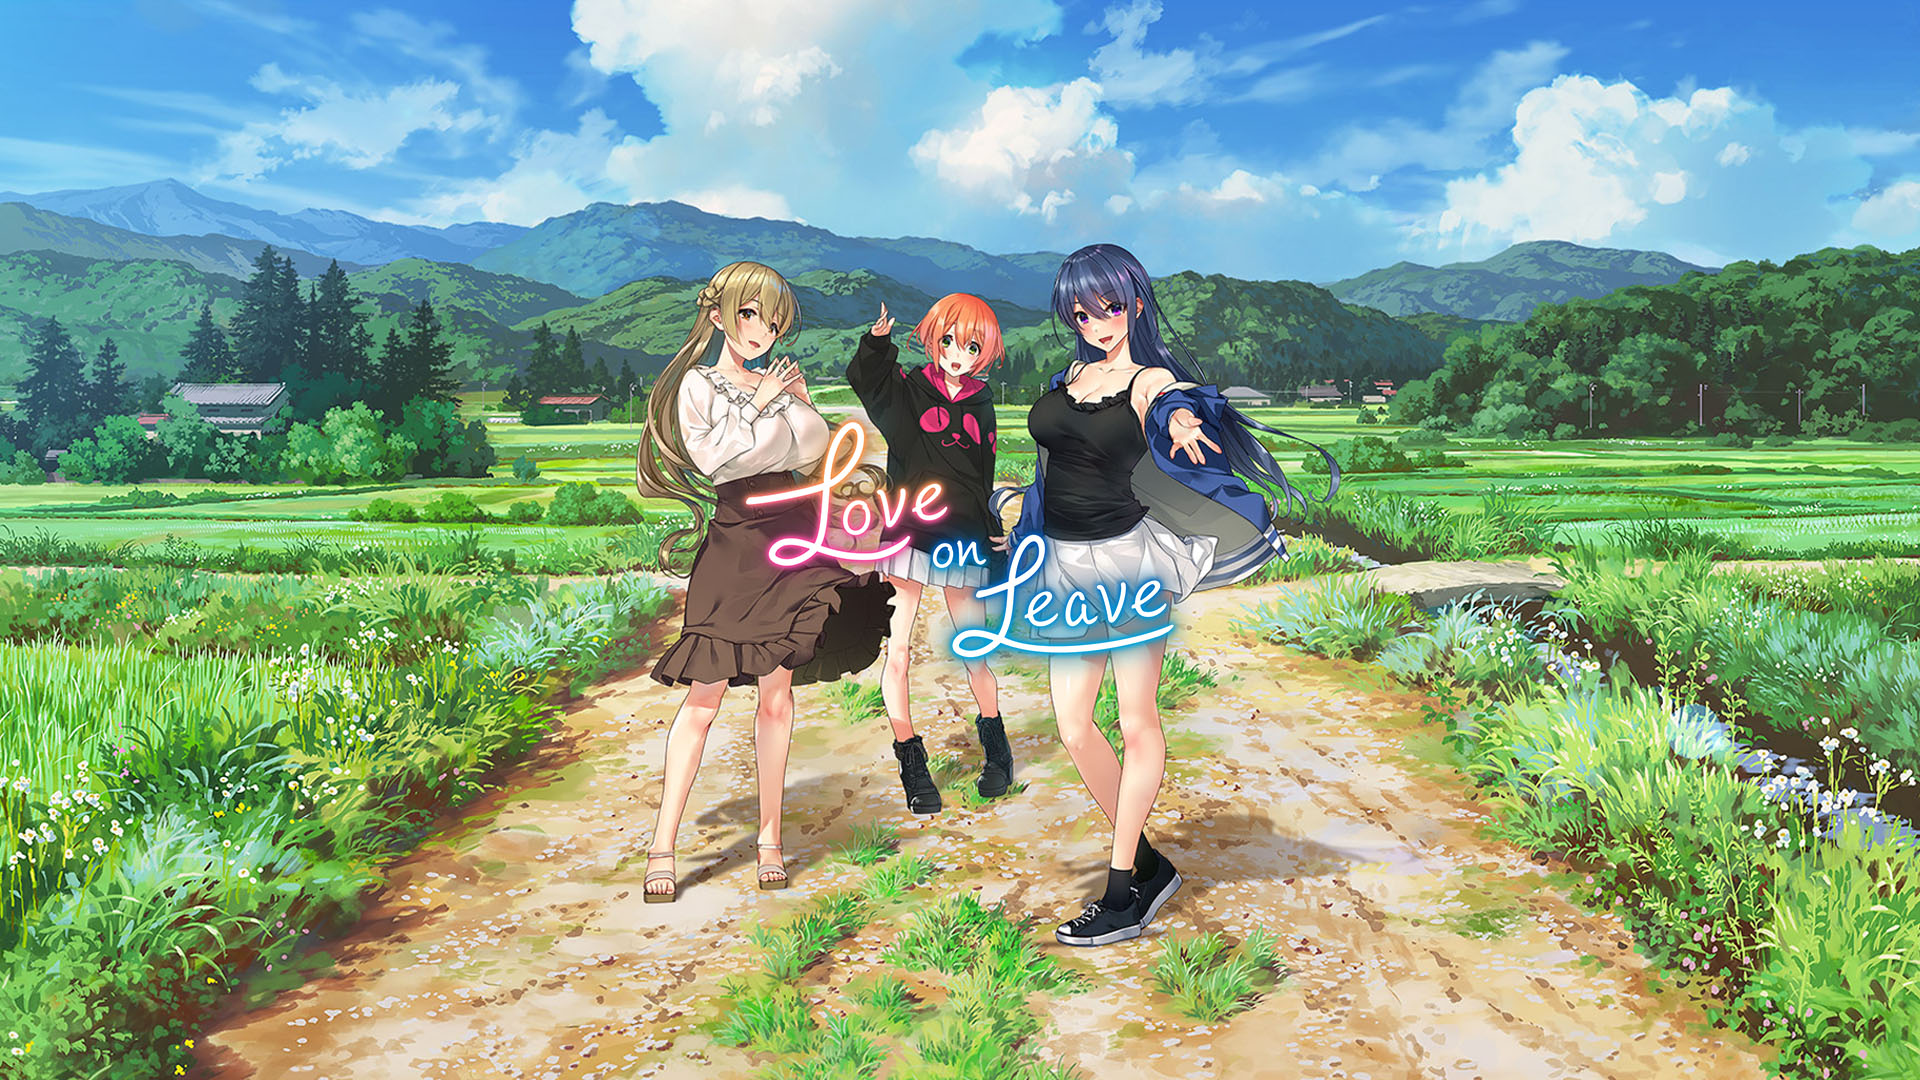 Japanese countryside romance game Love on Leave announced